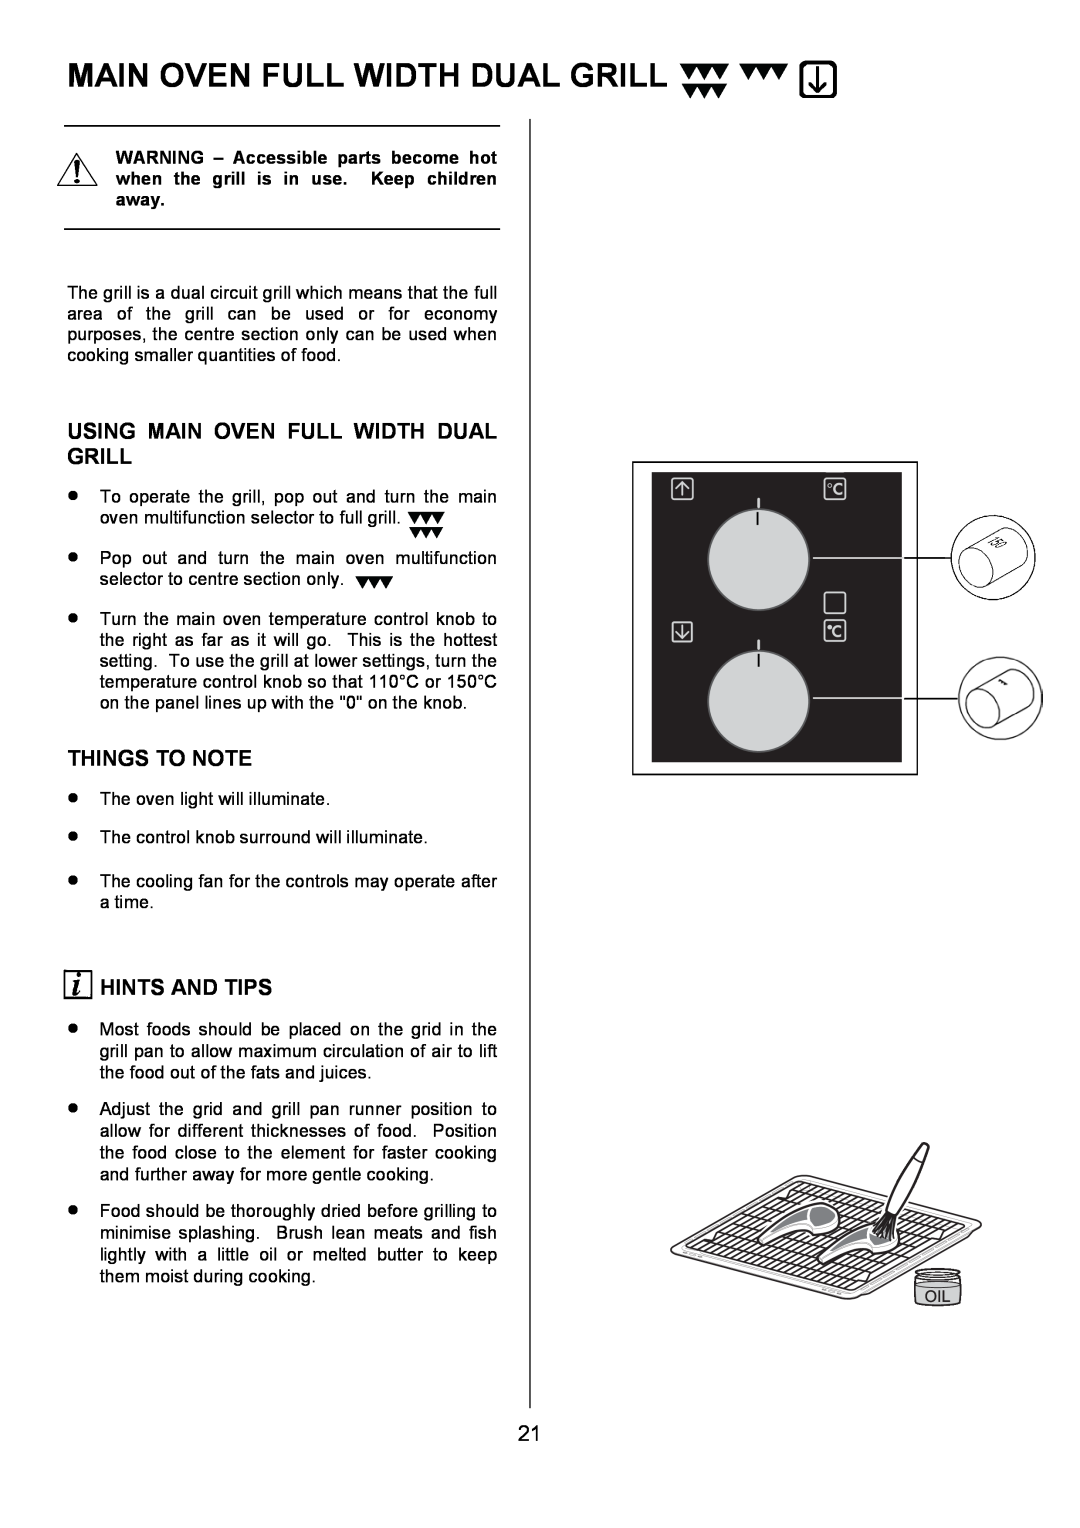 Electrolux U7101-4 operating instructions Using Main Oven Full Width Dual Grill, Things To Note, Hints And Tips 